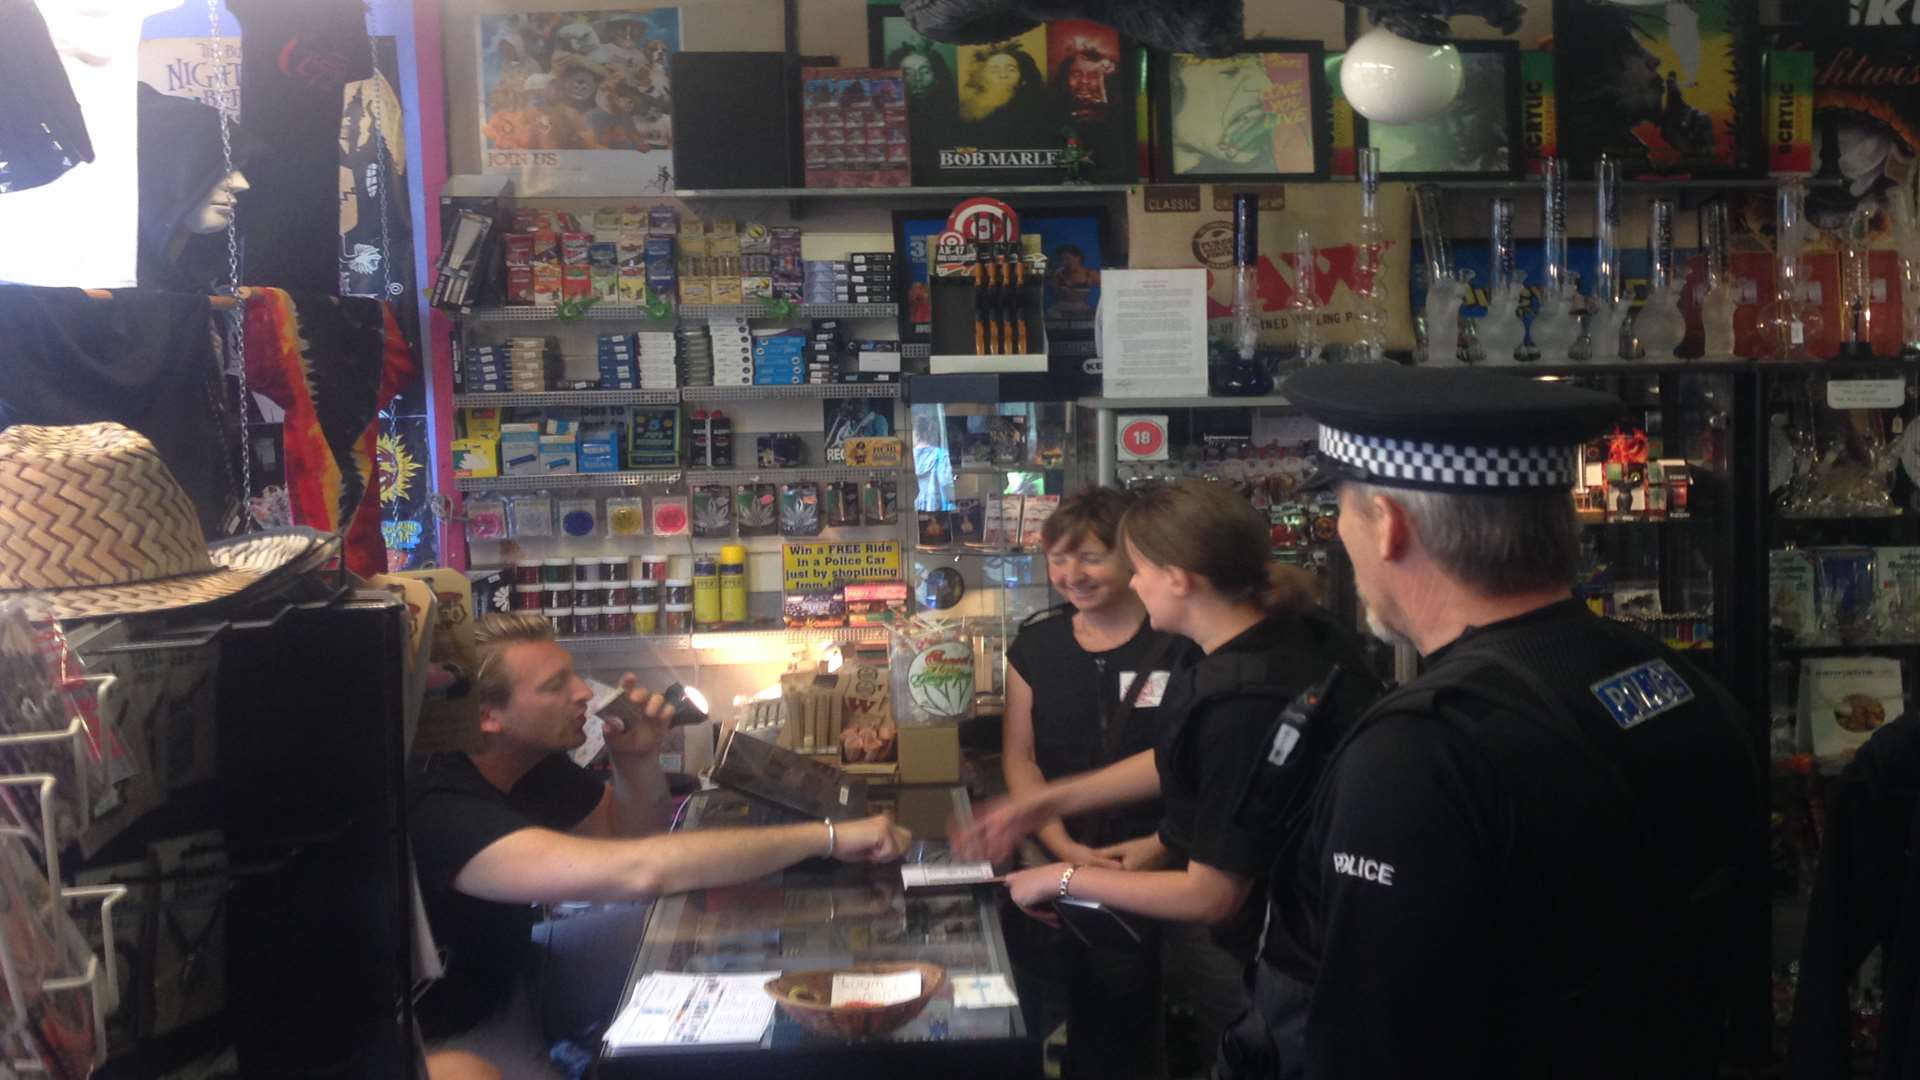 Police and trading standards inside a store